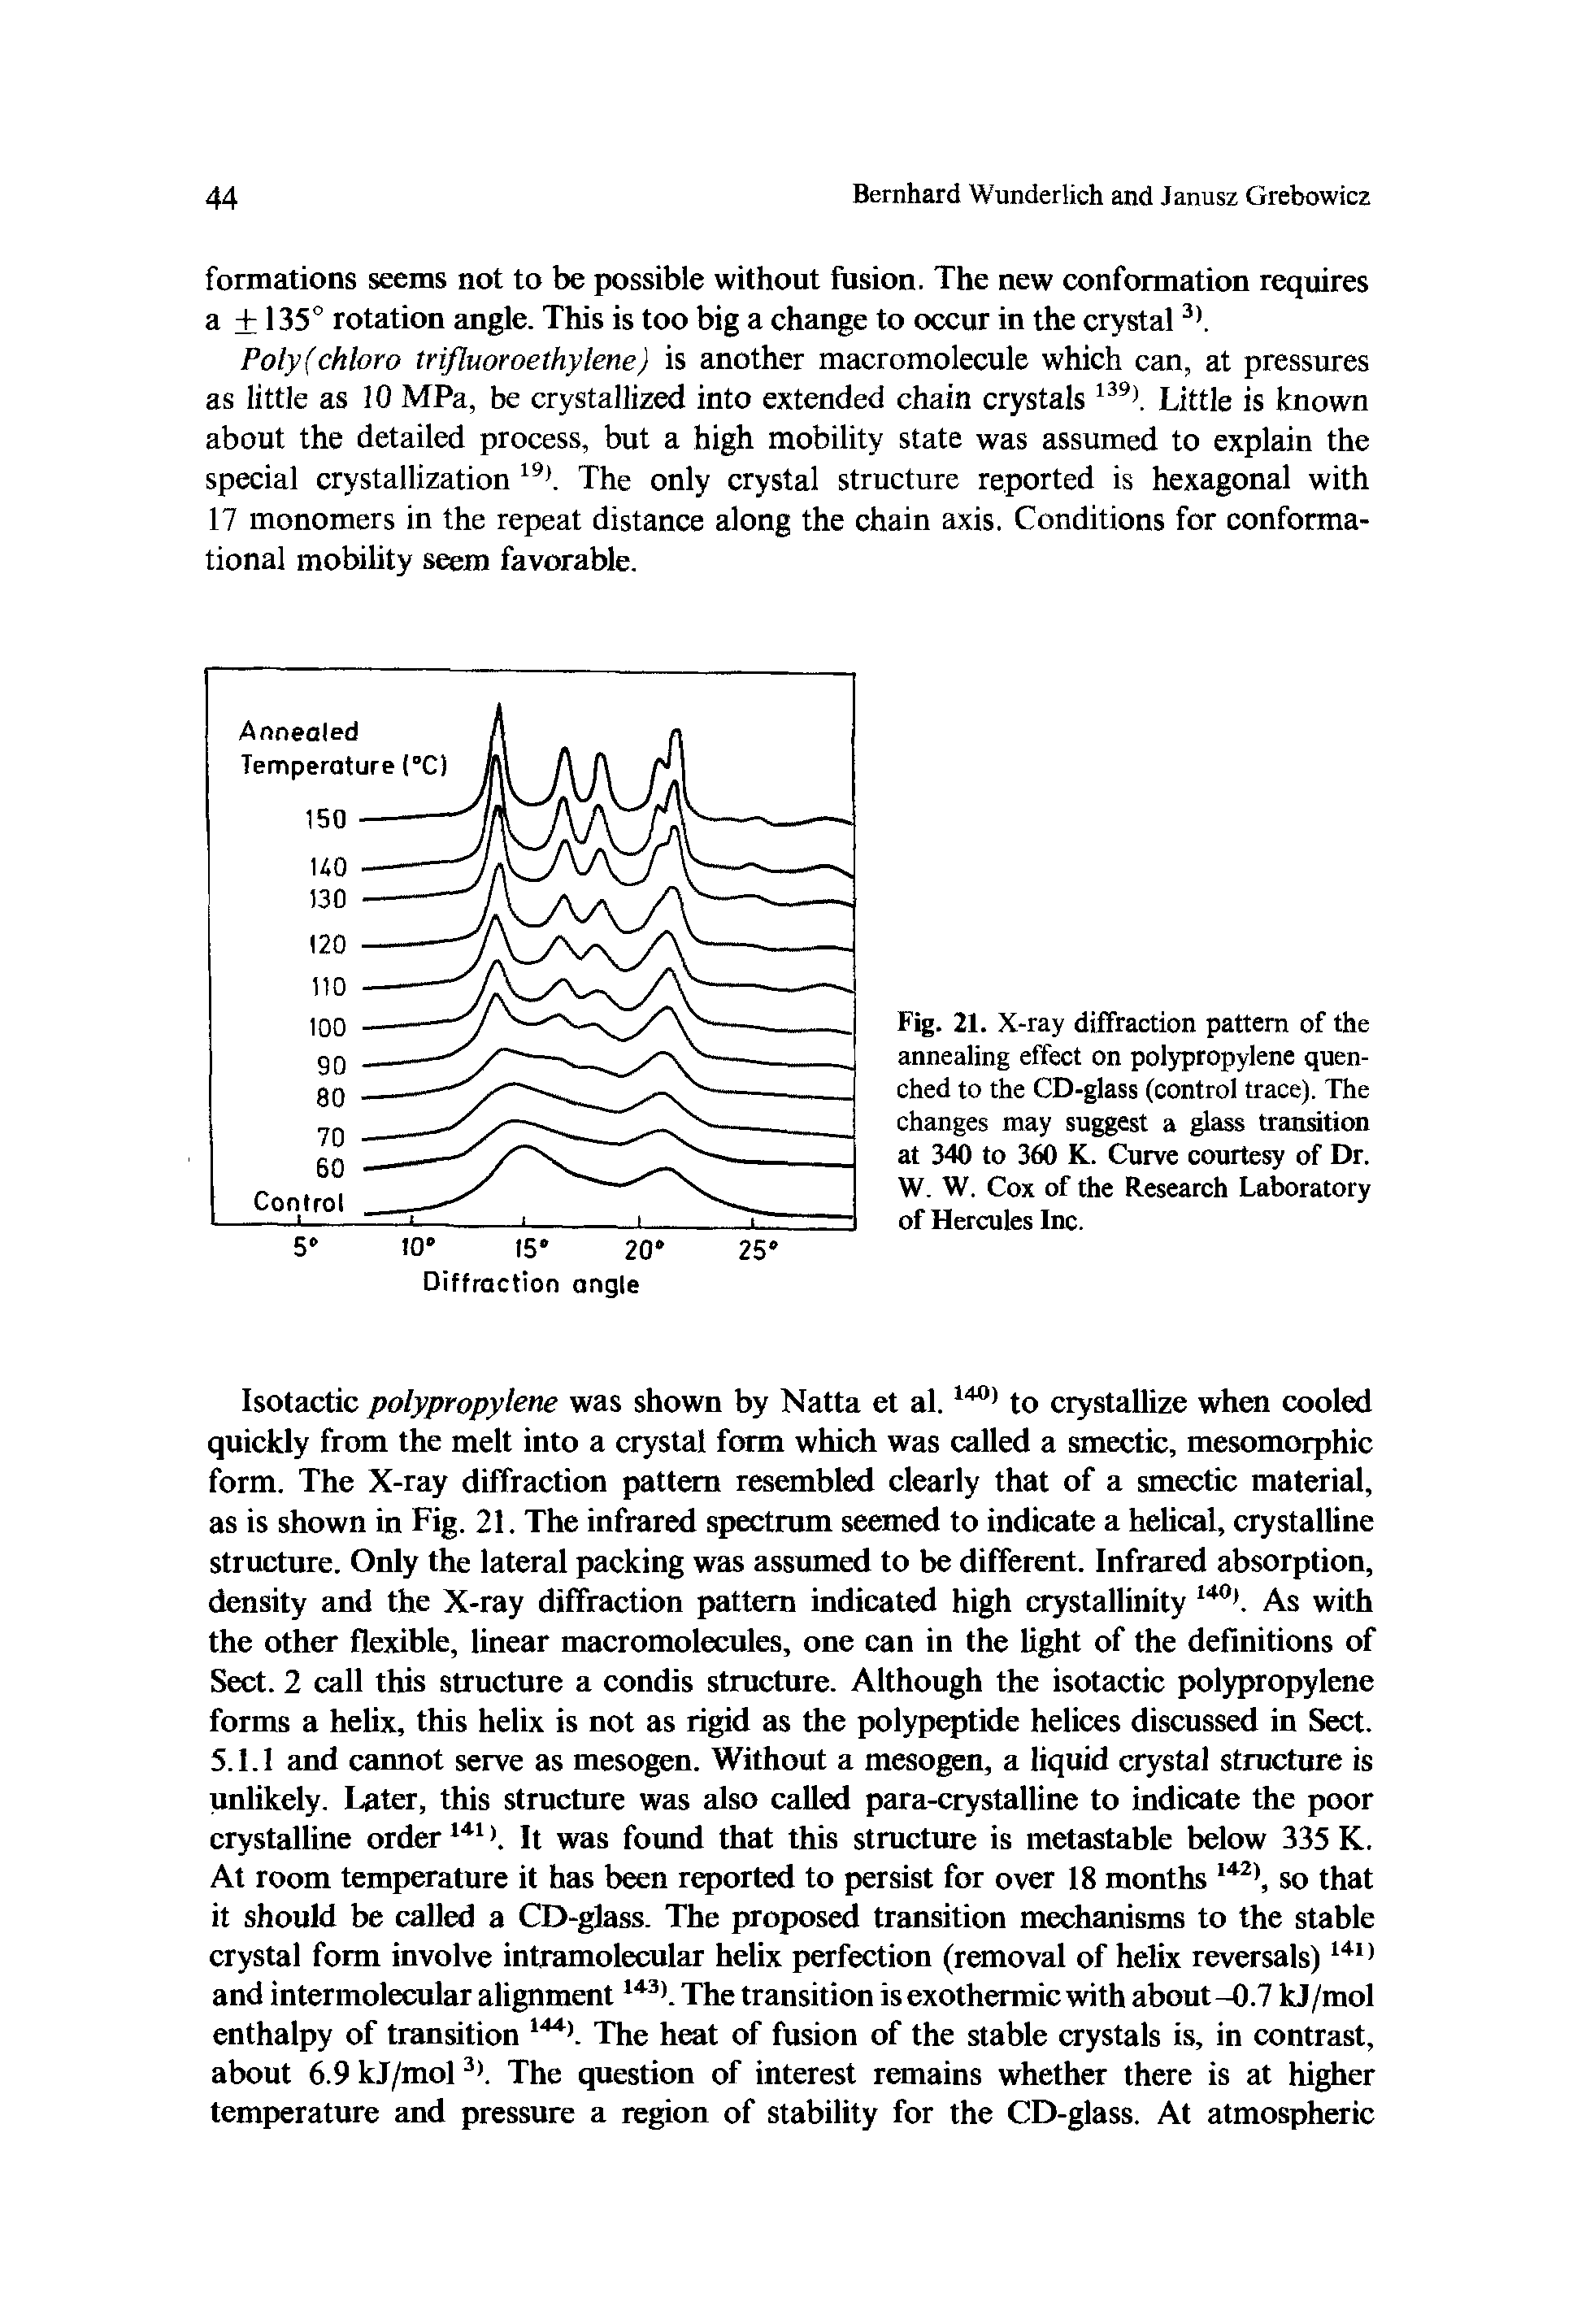 Fig. 21. X-ray diffraction pattern of the annealing effect on polypropylene quenched to the CD-glass (control trace). The changes may suggest a glass transition at 340 to 360 K. Curve courtesy of Dr. W. W. Cox of the Research Laboratory of Hercules Inc.